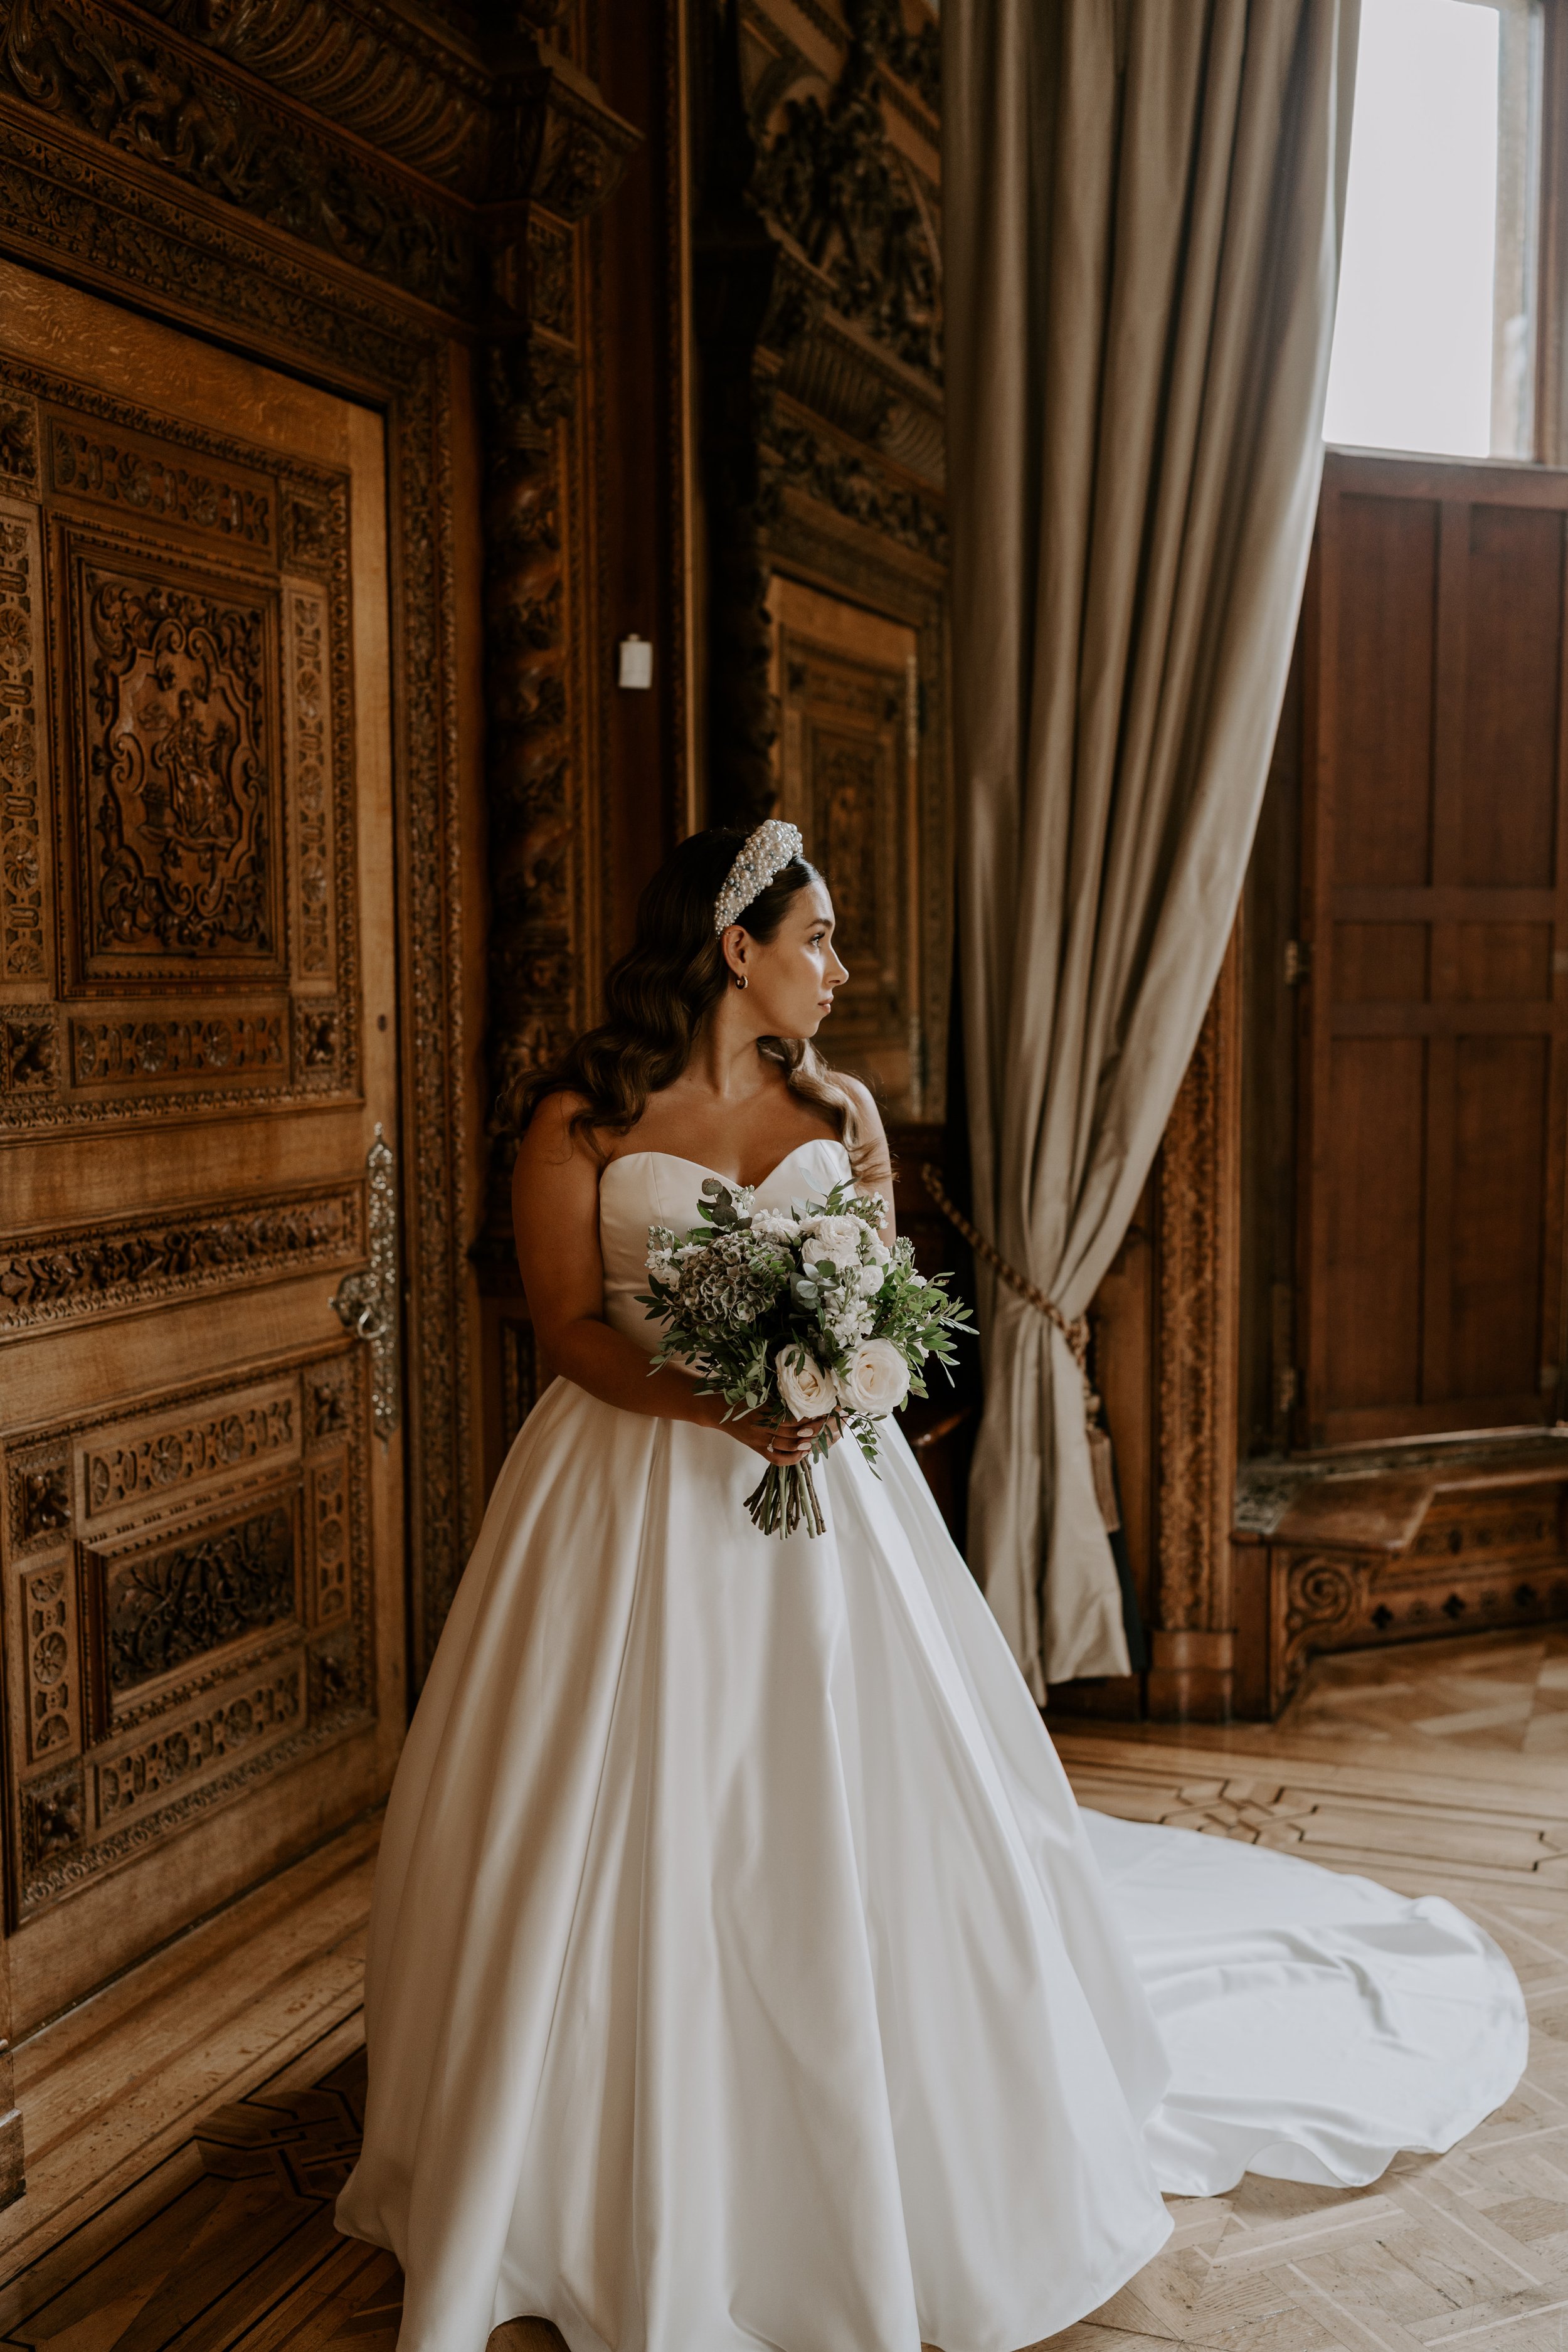  A stylish hand tied bouquet is being held by the bride as she stands in a grand wood panelled room. The brides simplistic palette makes a bold statement as the modern wedding bouquet is filled with white flowers and greenery.  Photo by: Marta D Phot